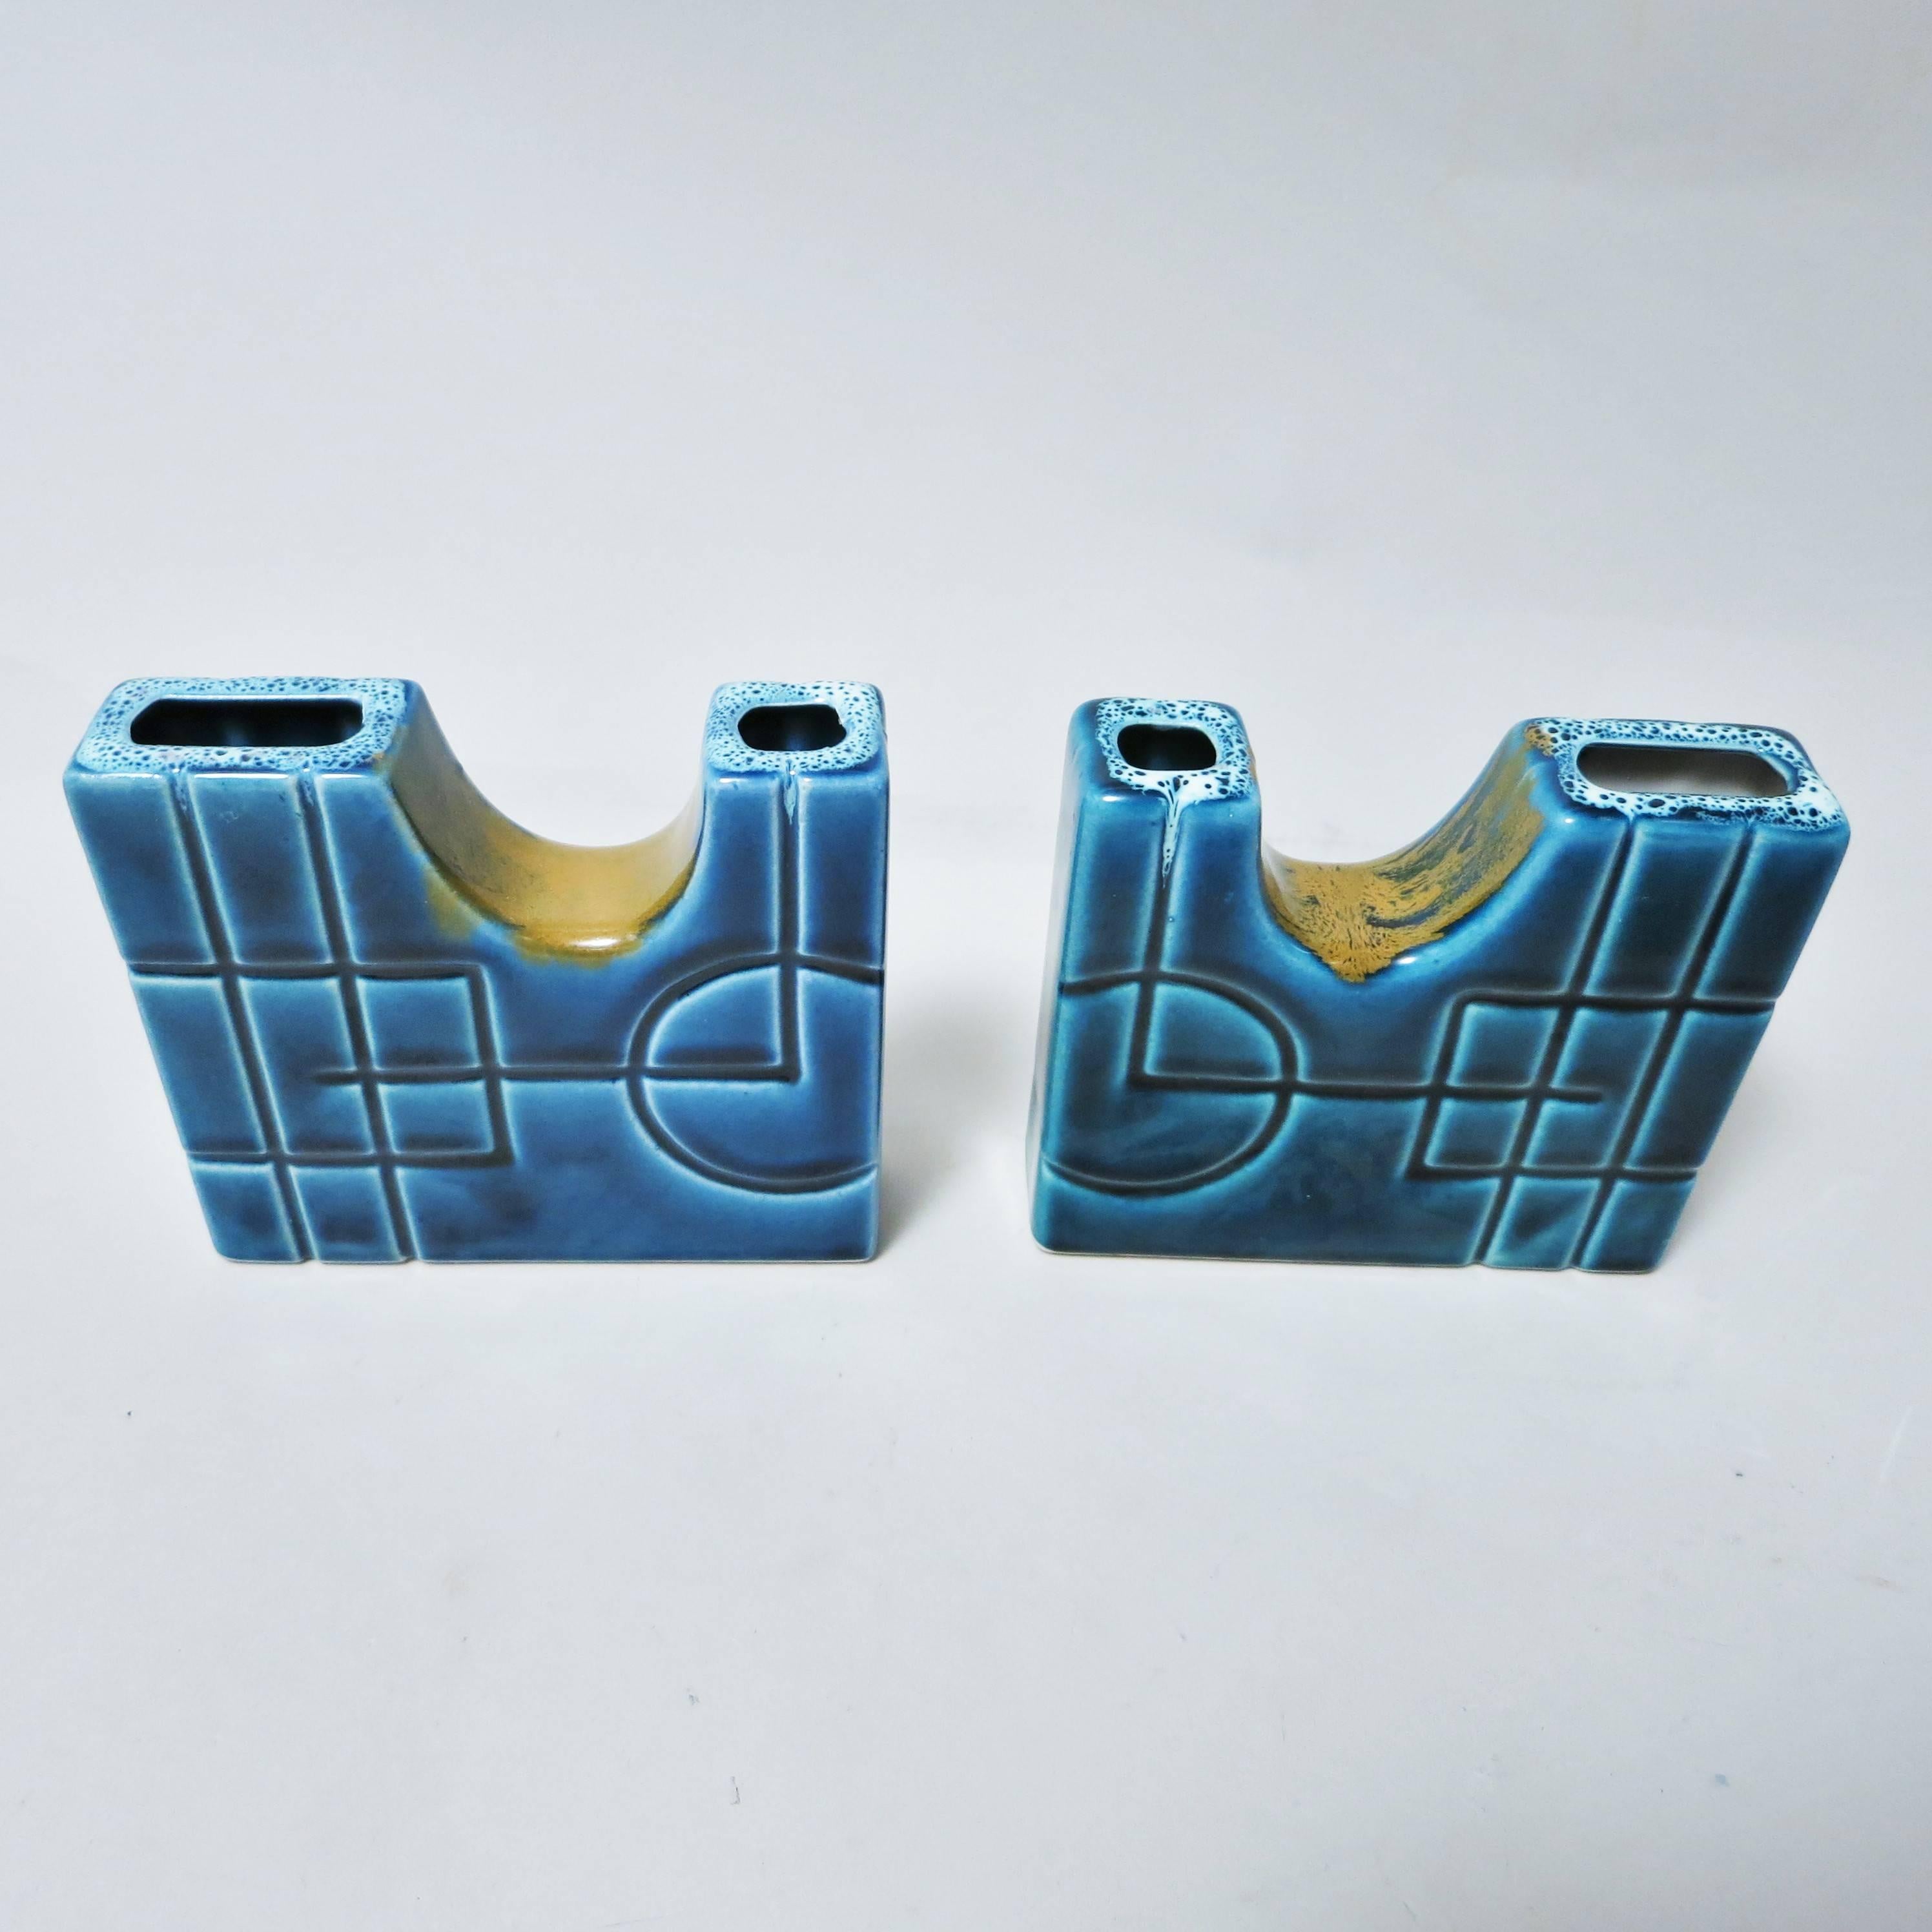 Pair of graphical vases in blue enamelled porcelain, Italian work of the 1960s attributed to Marcello Fantoni.